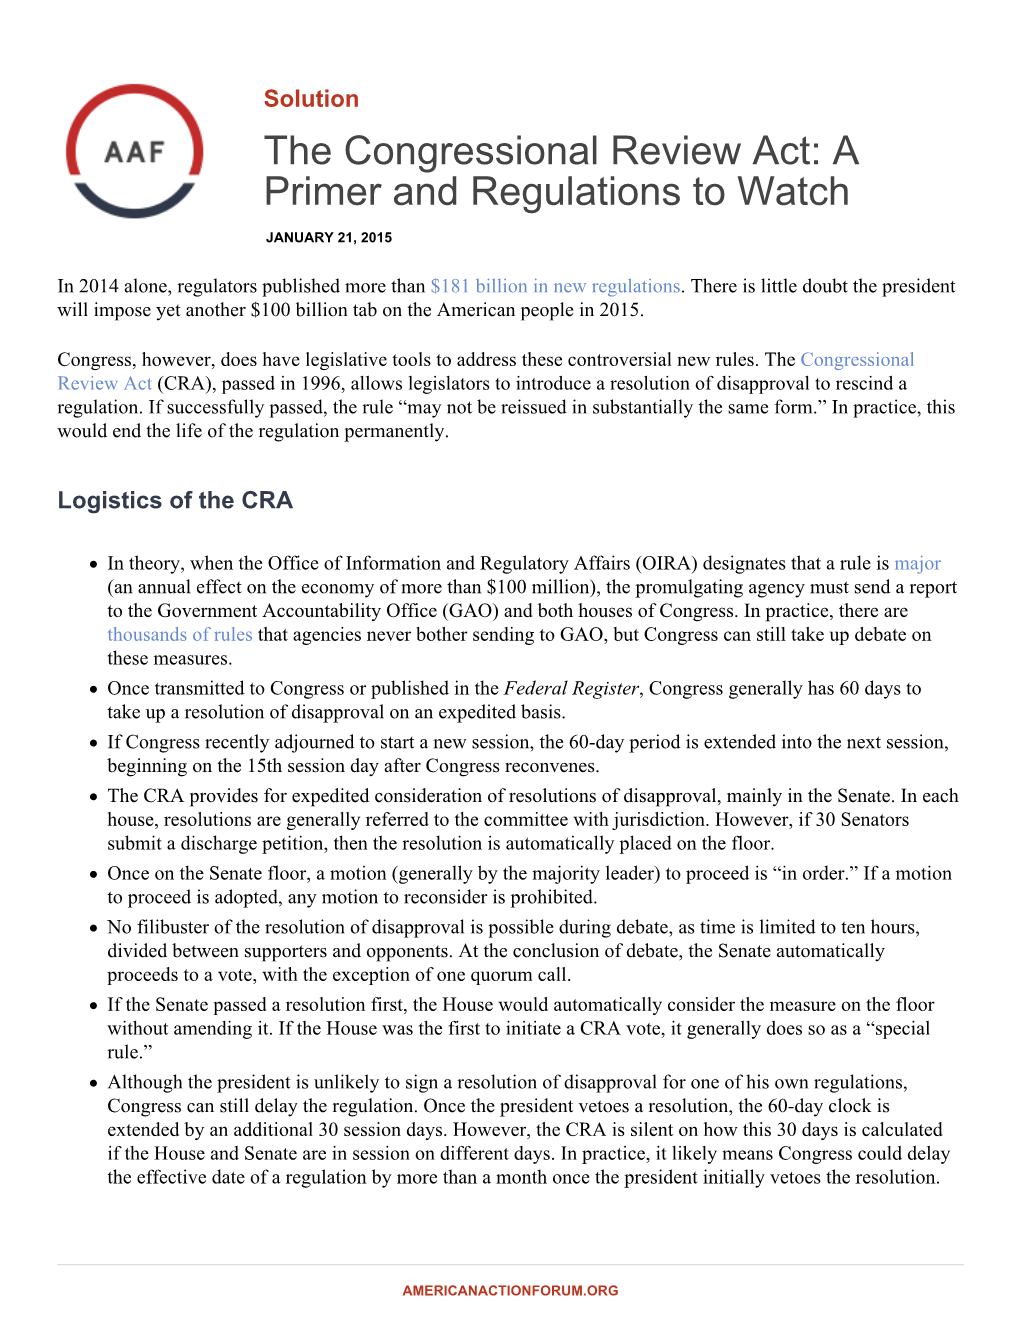 The Congressional Review Act: a Primer and Regulations to Watch